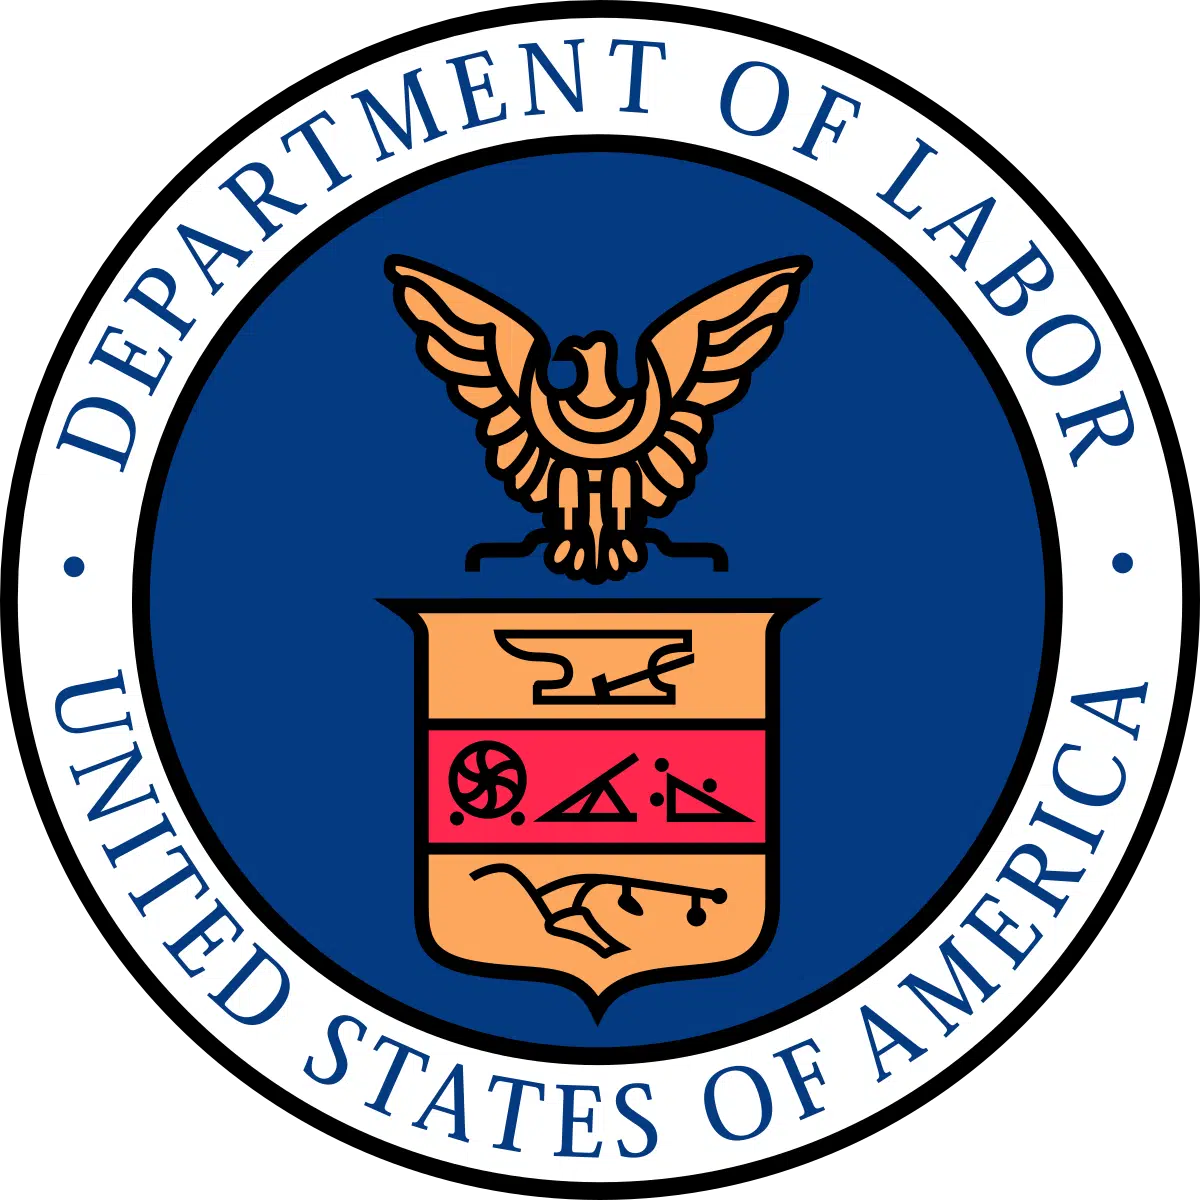 U.S. Department of Labor Investigation Uncovers Federal Child Labor Law Violations at Restaurant Locations in 9 States